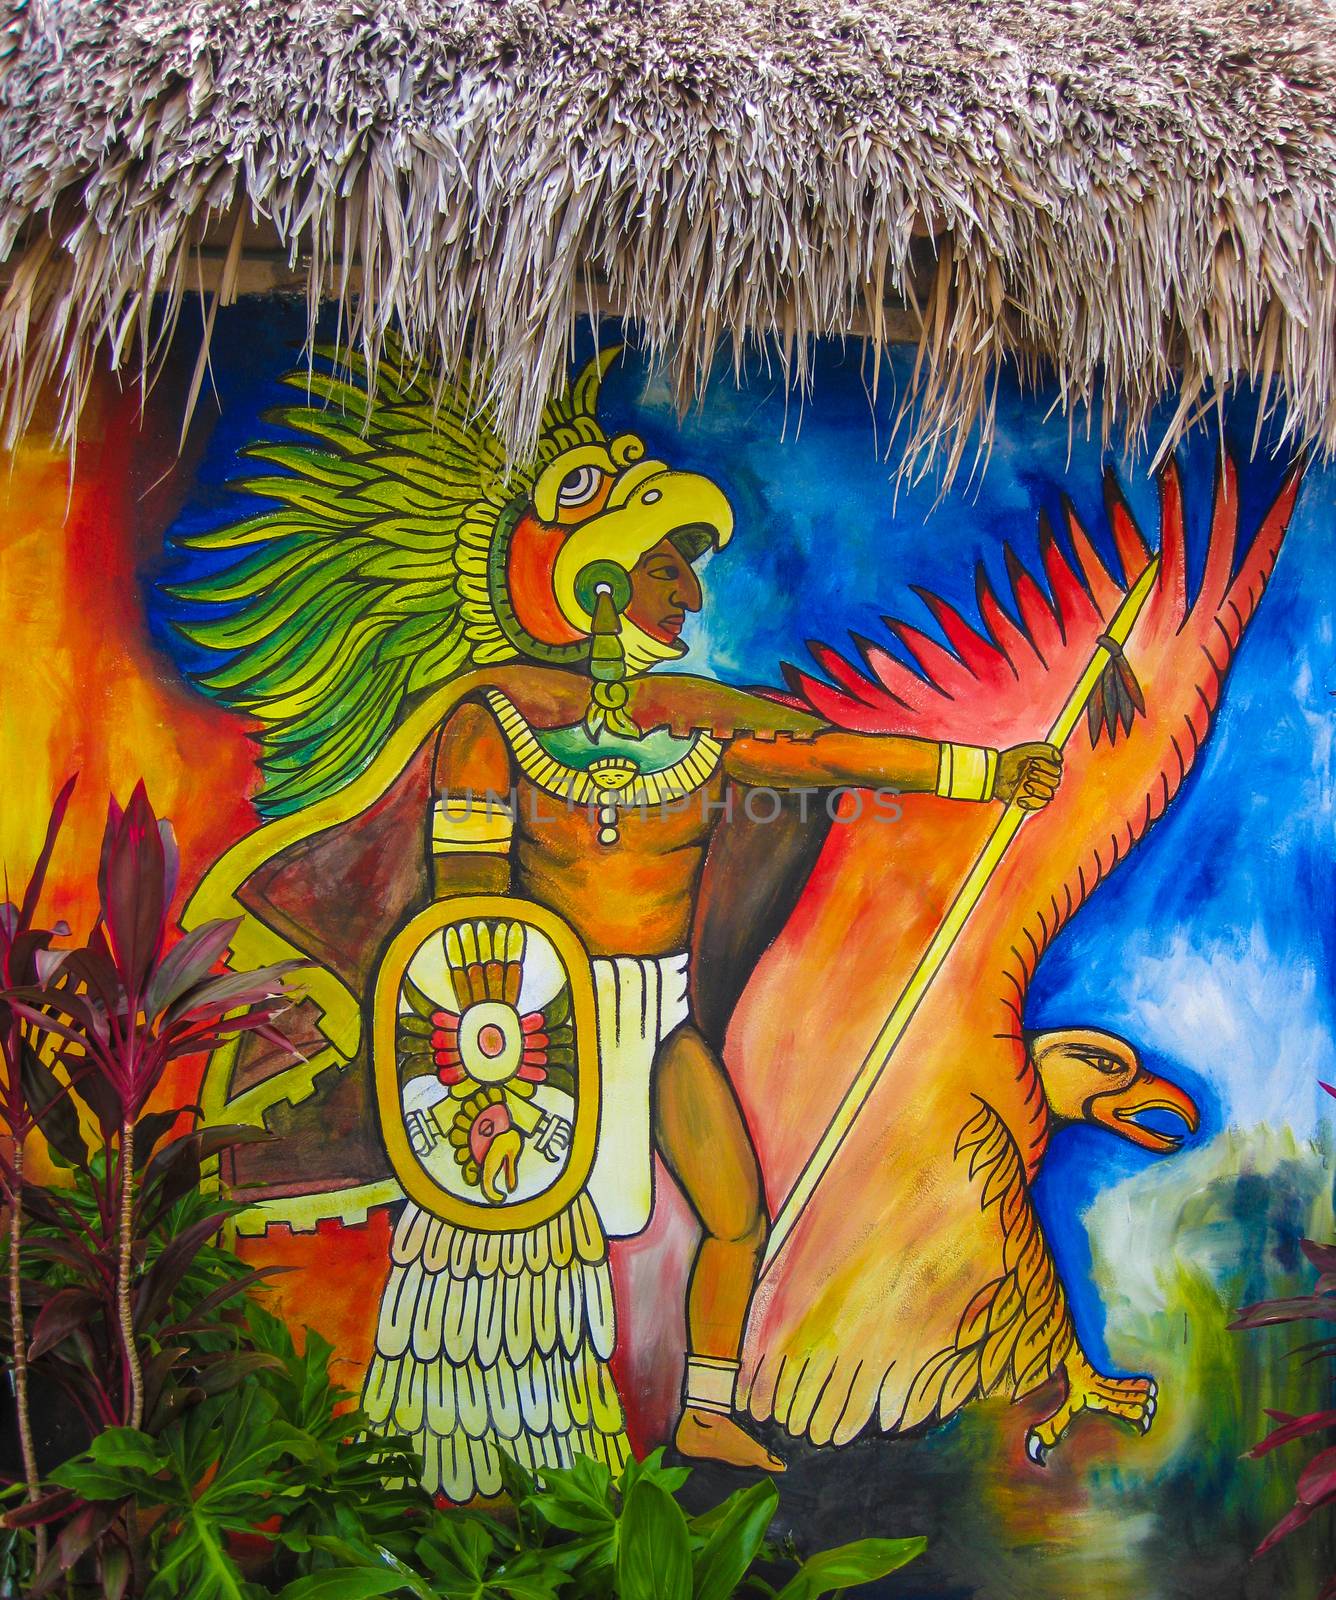 A wall mural depicting an ancient Mayan and an eagle in Yucatan, Mexico.
Photo taken on: June 30th, 2008